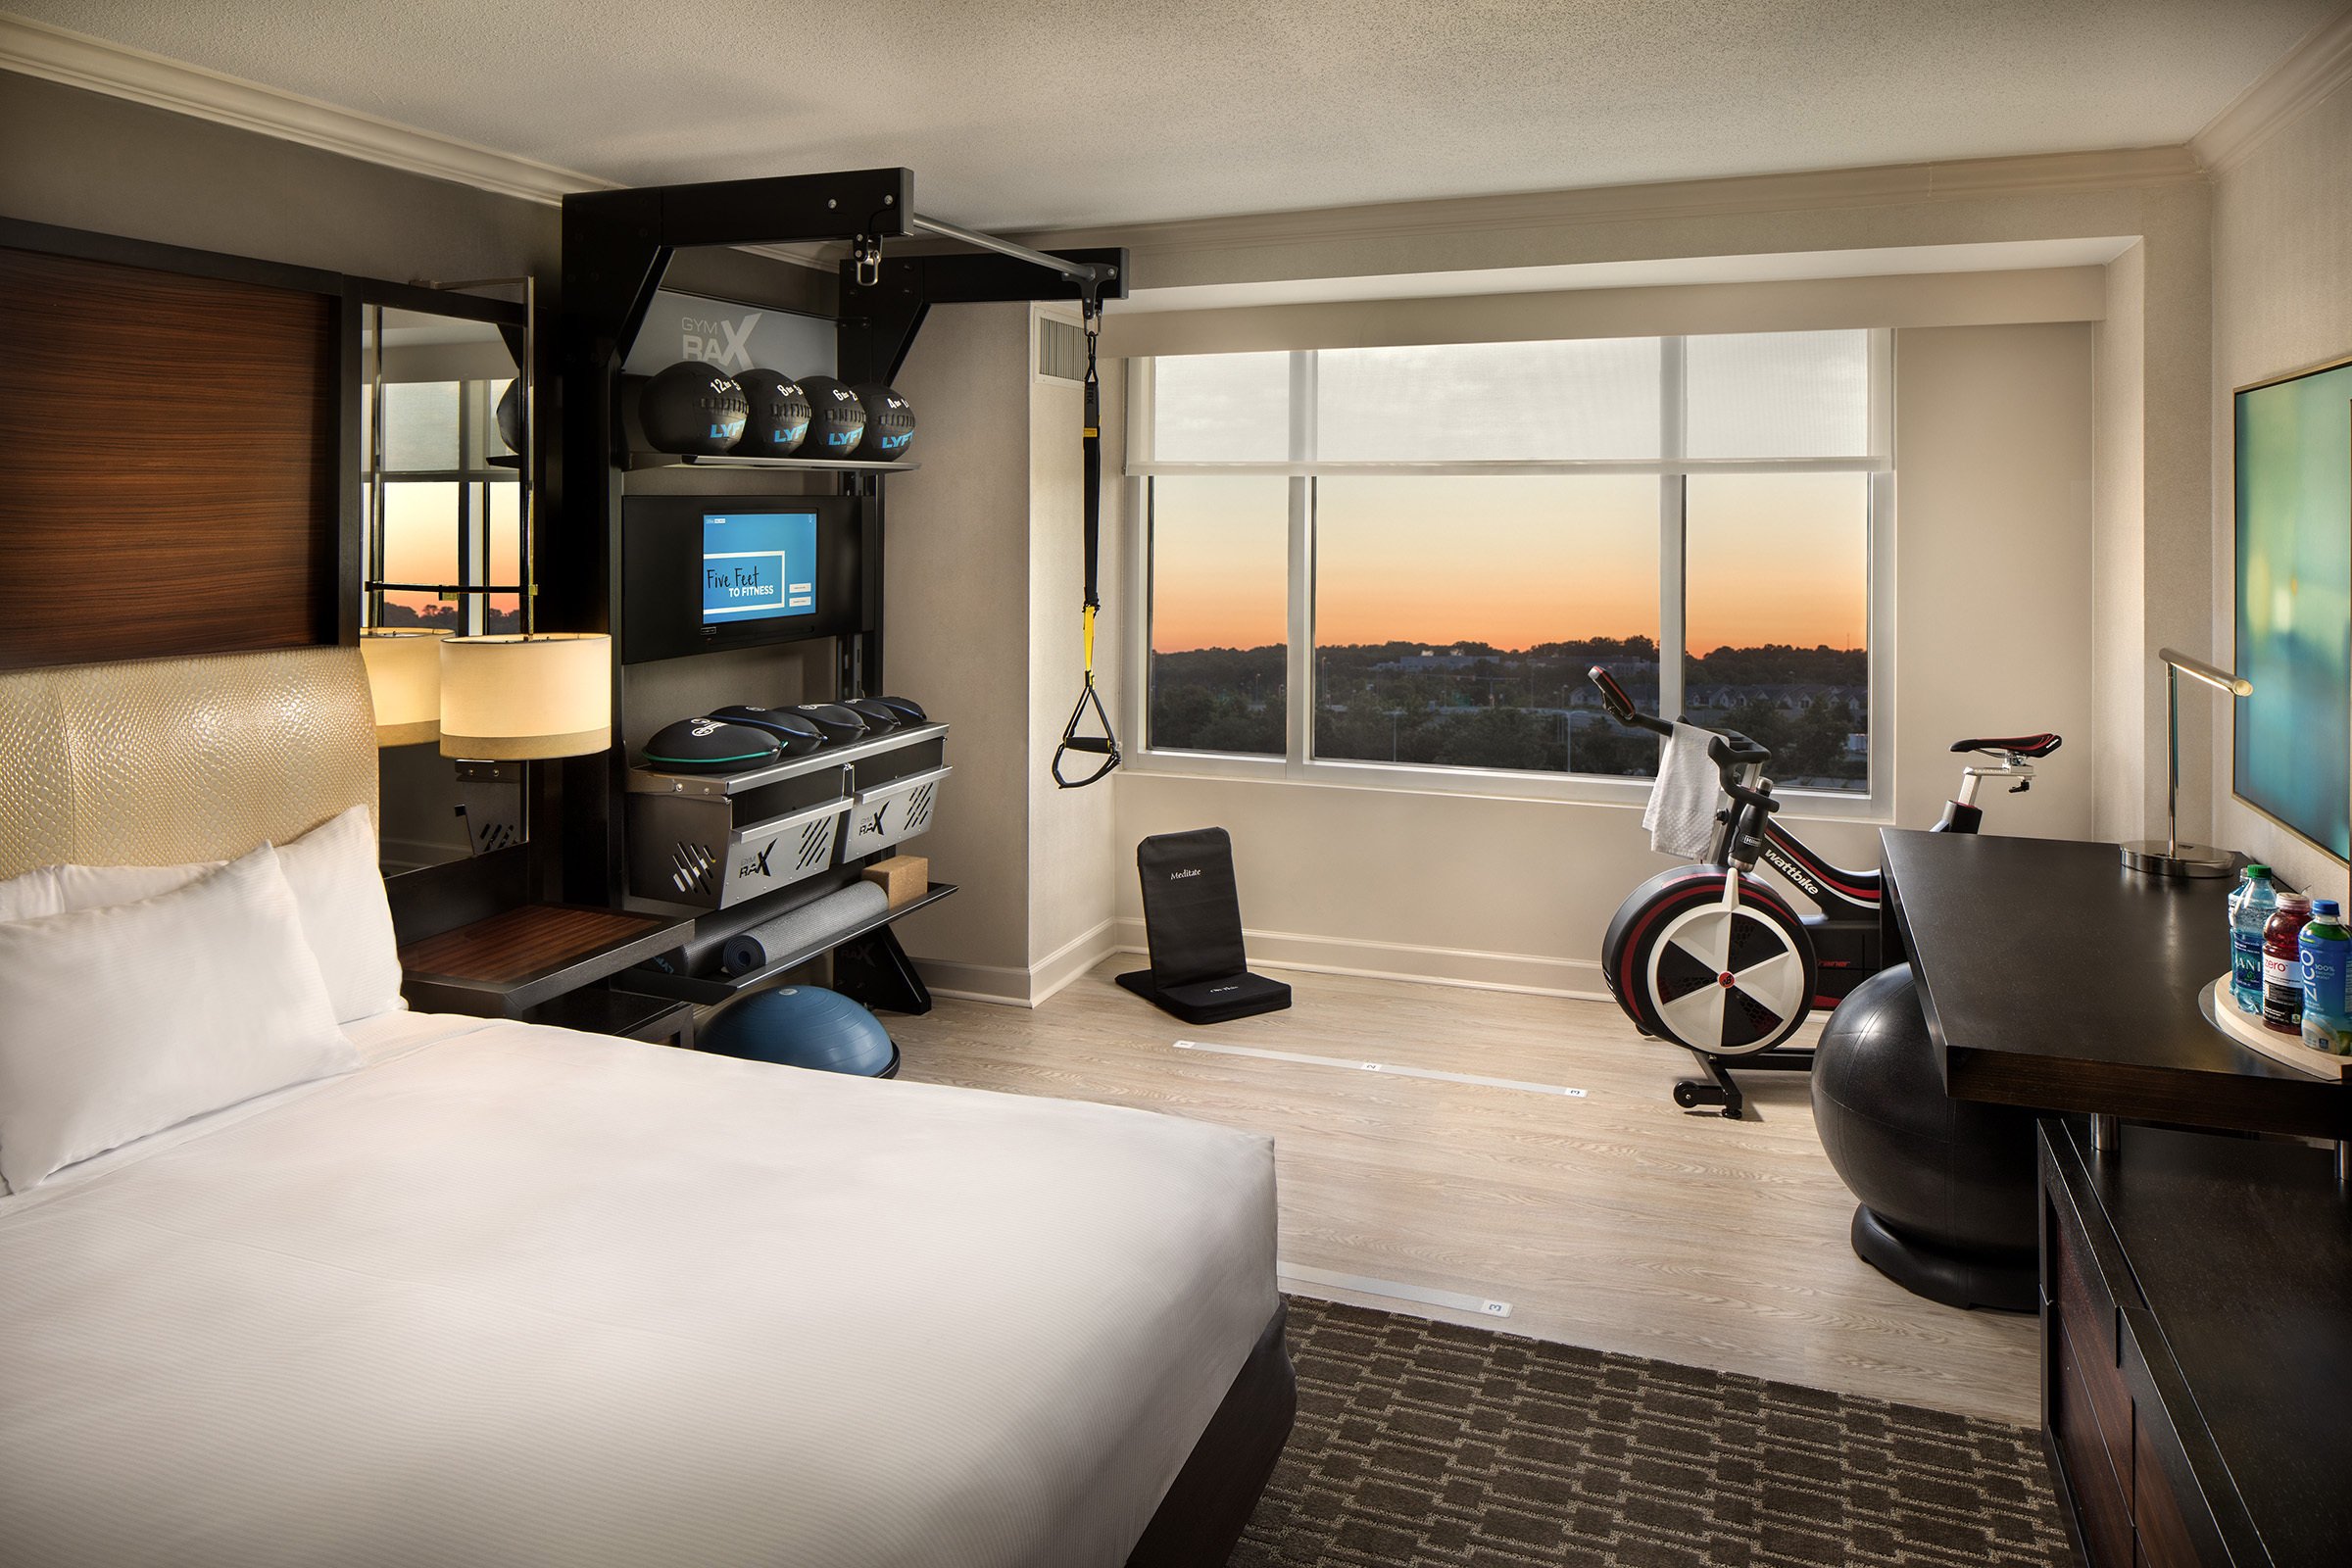 Hiltons new Five Feet to Fitness guestrooms let guests work out in privacy